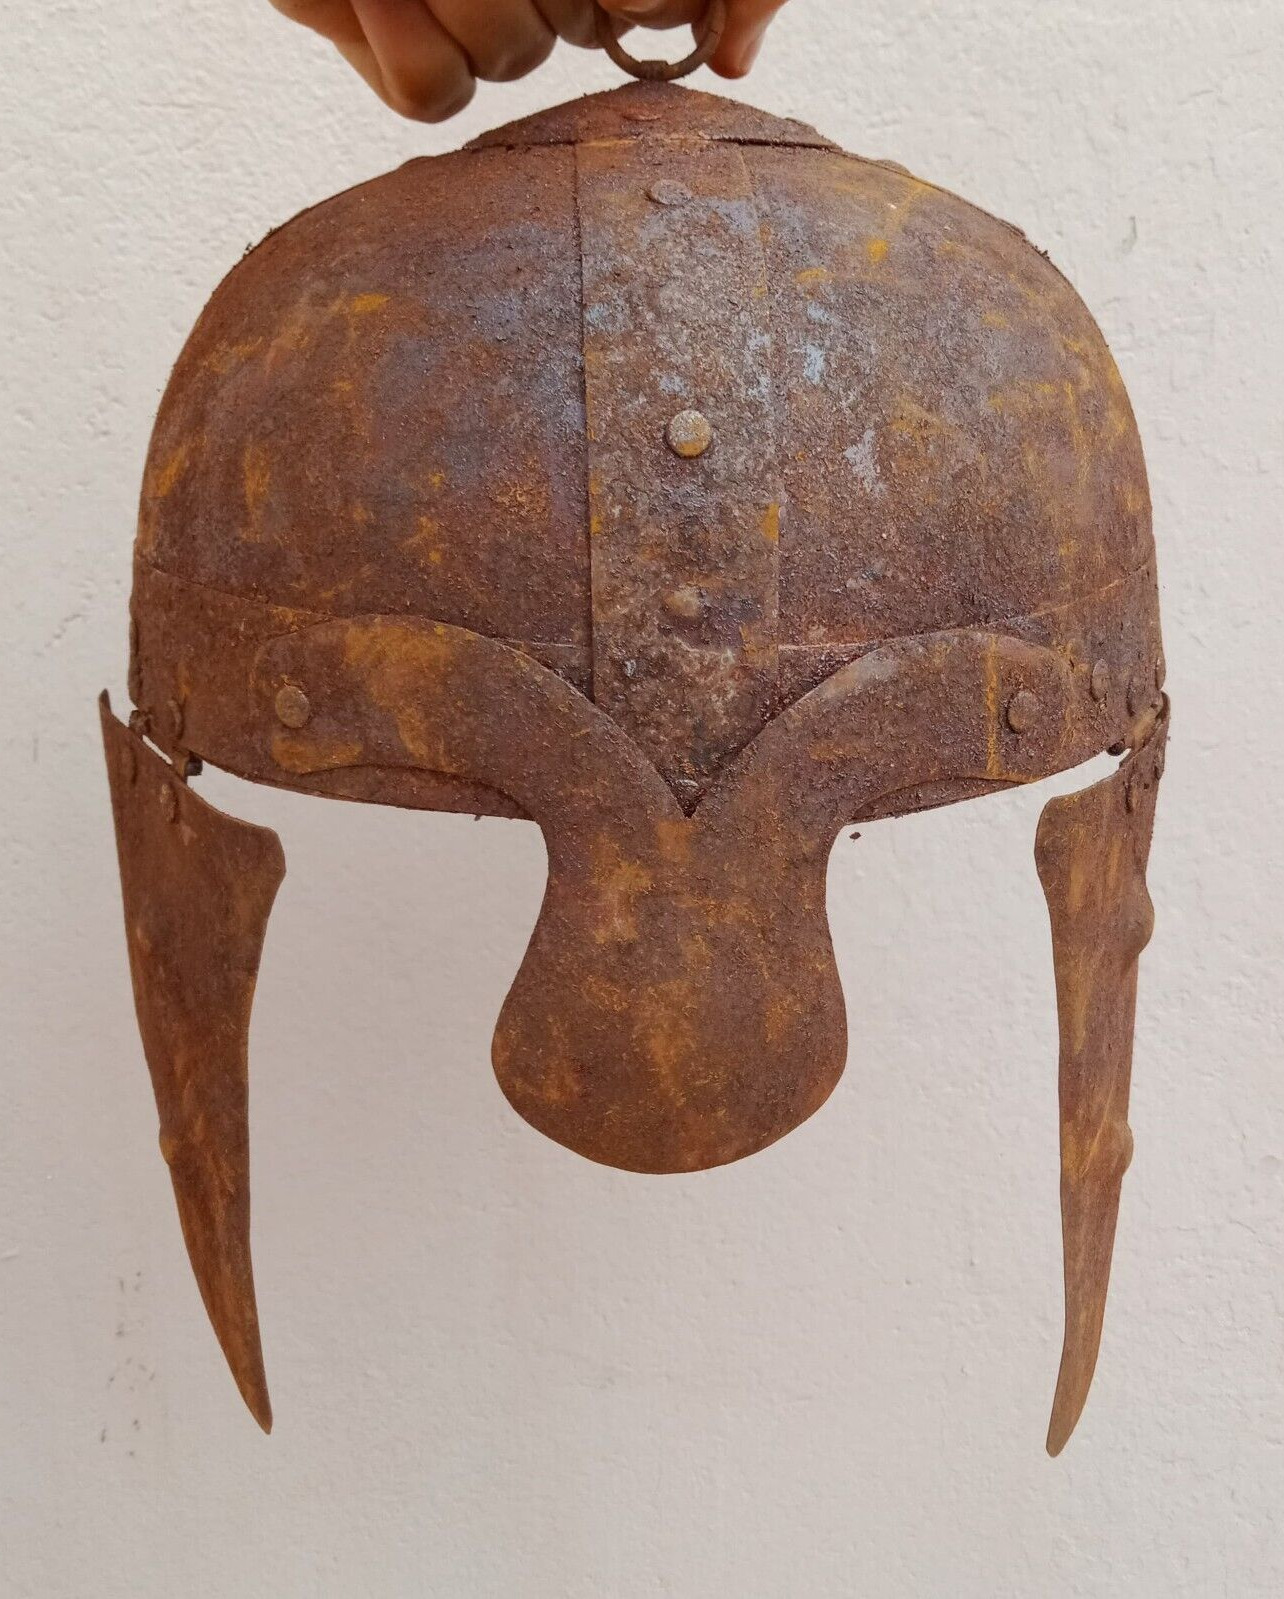 EXTREMELY RARE ANCIENT WORIOR CRUSSADERS IRON FULL SIZE HEAD HELMET